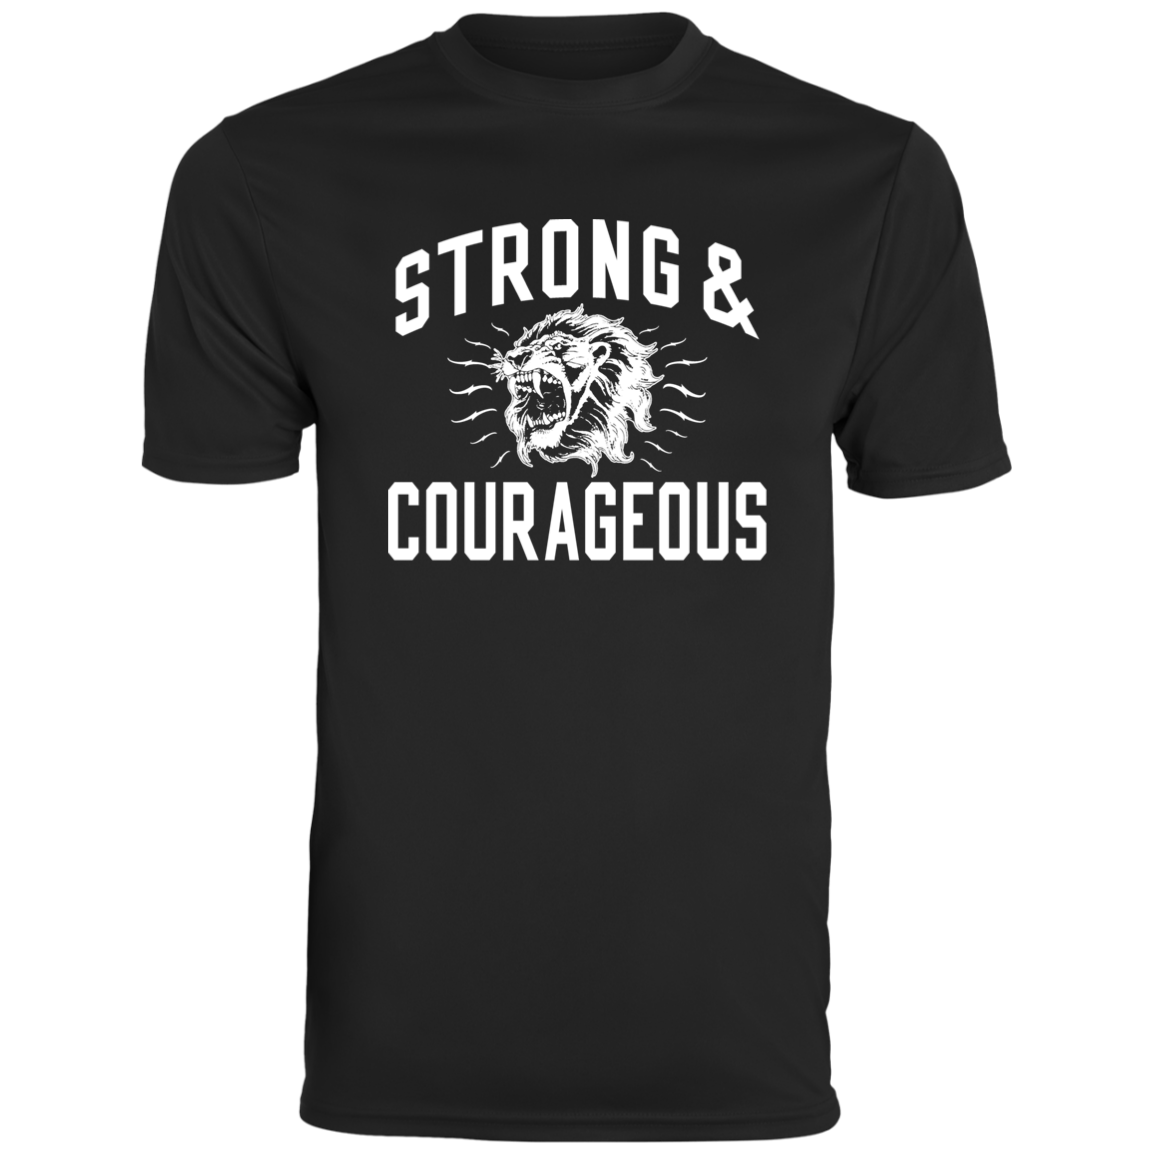 Strong & Courageous Moisture-Wicking Tee